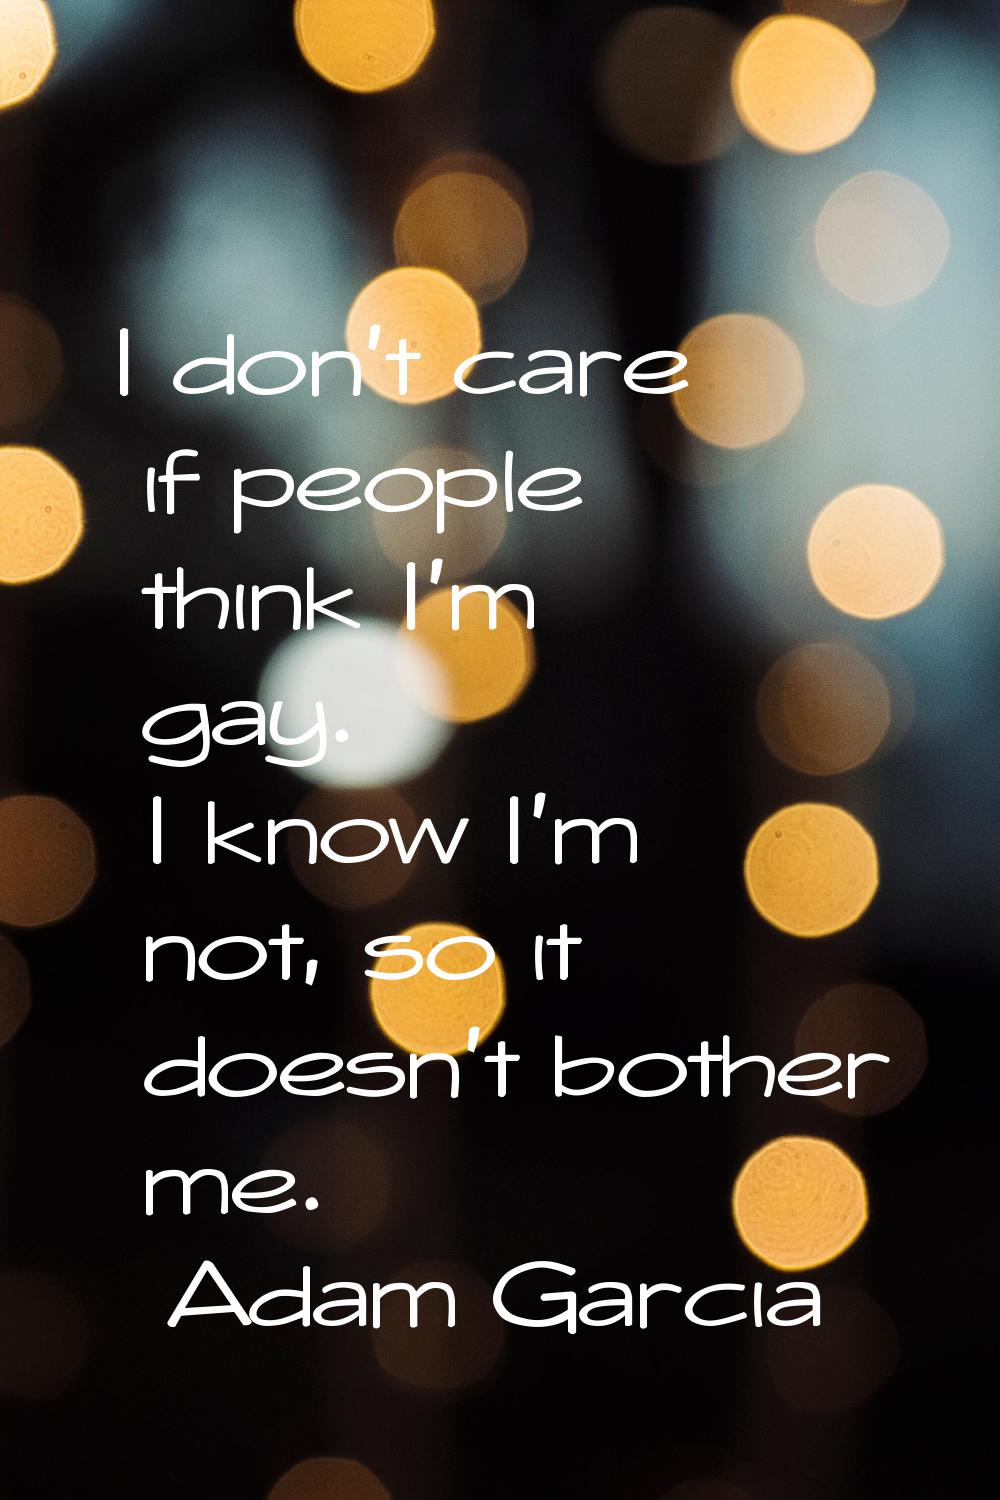 I don't care if people think I'm gay. I know I'm not, so it doesn't bother me.